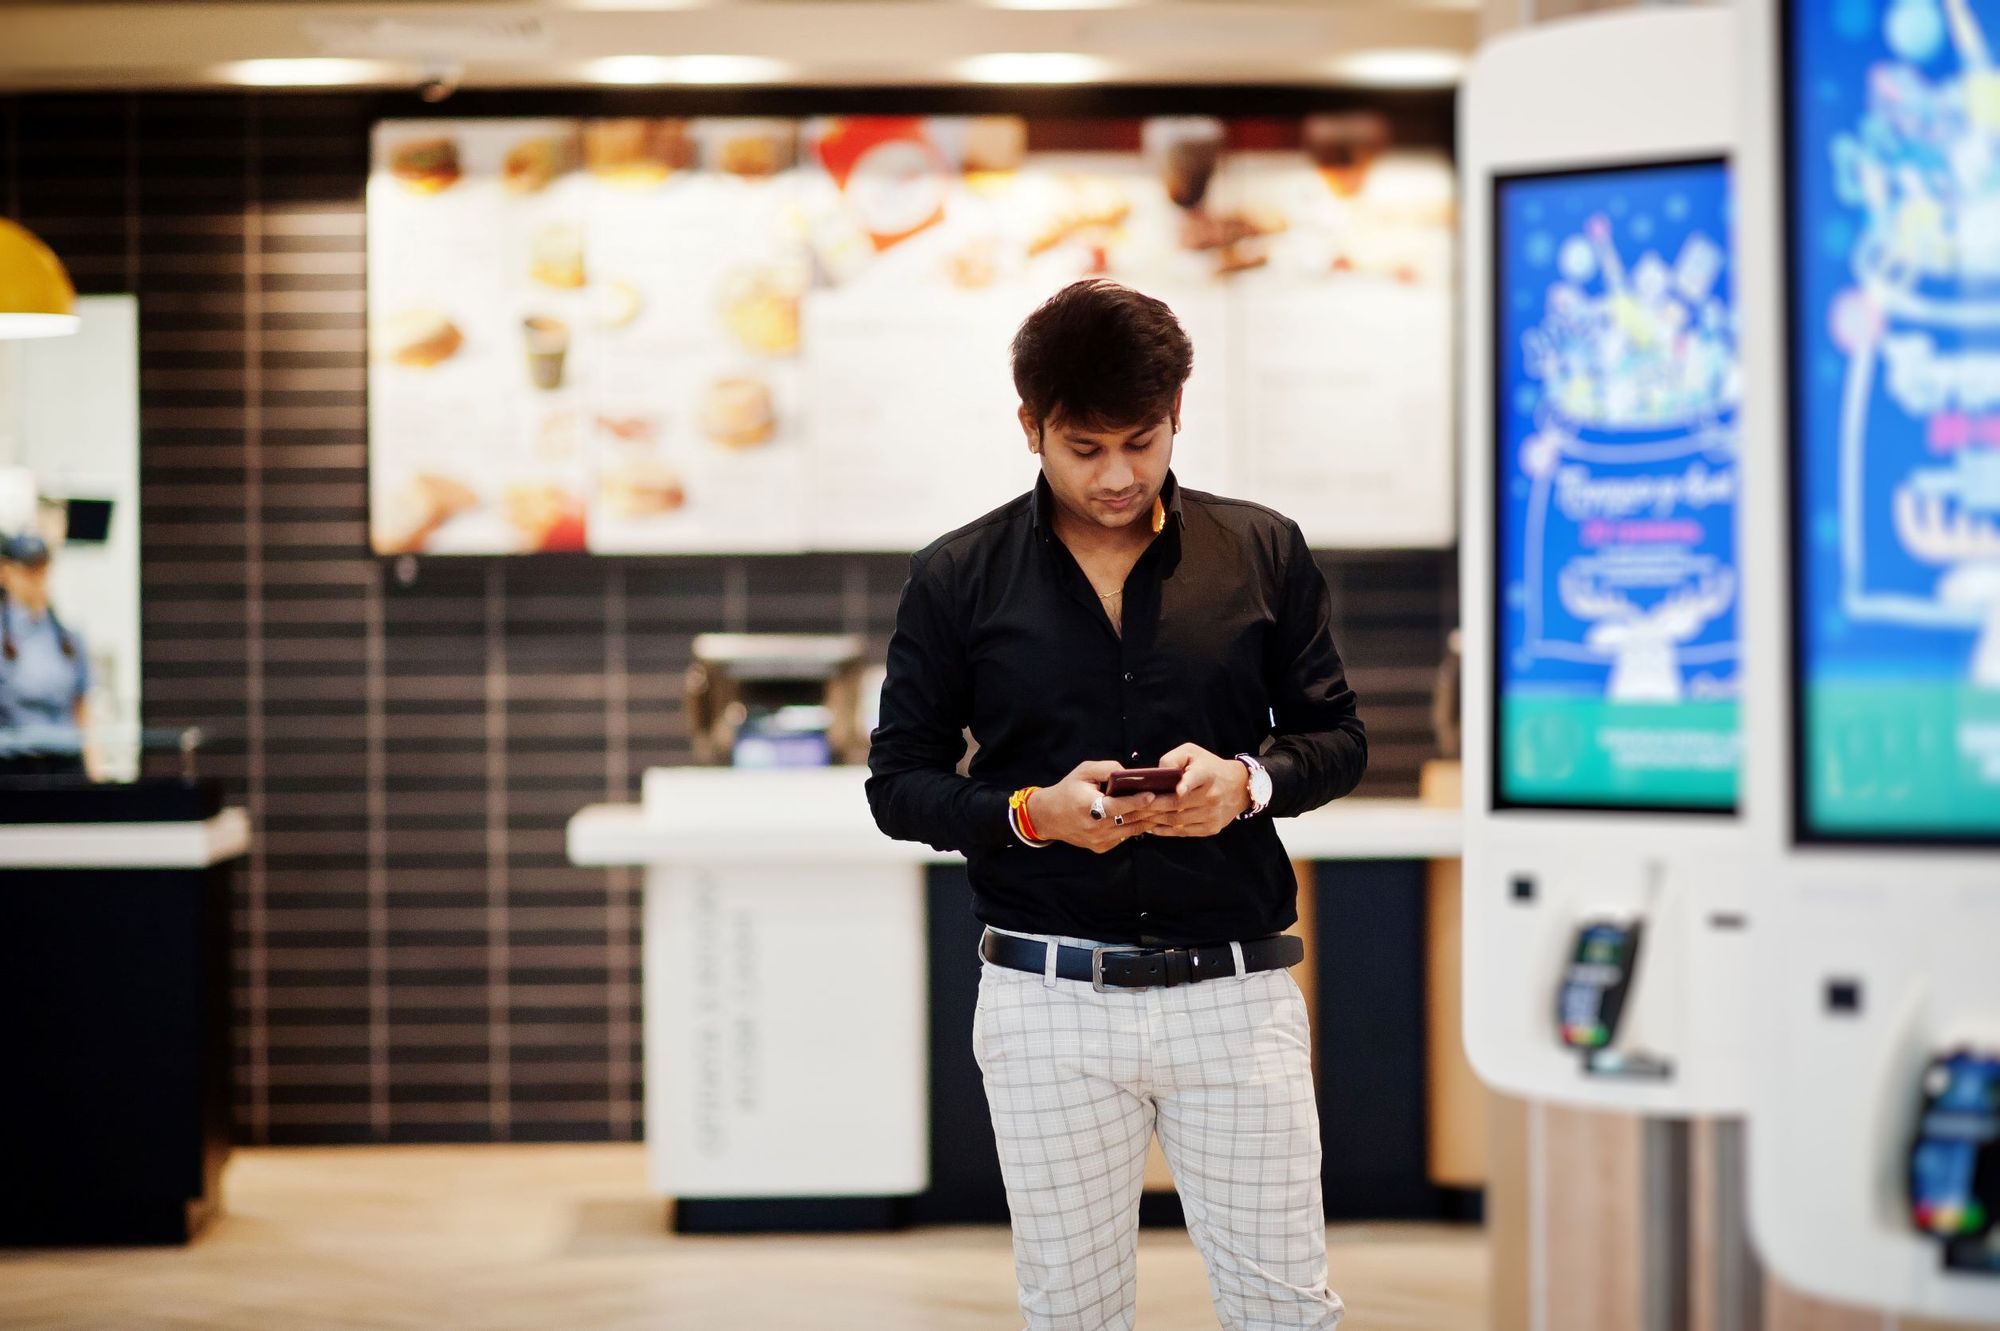 Self-Service Kiosks Are the Future of Ordering